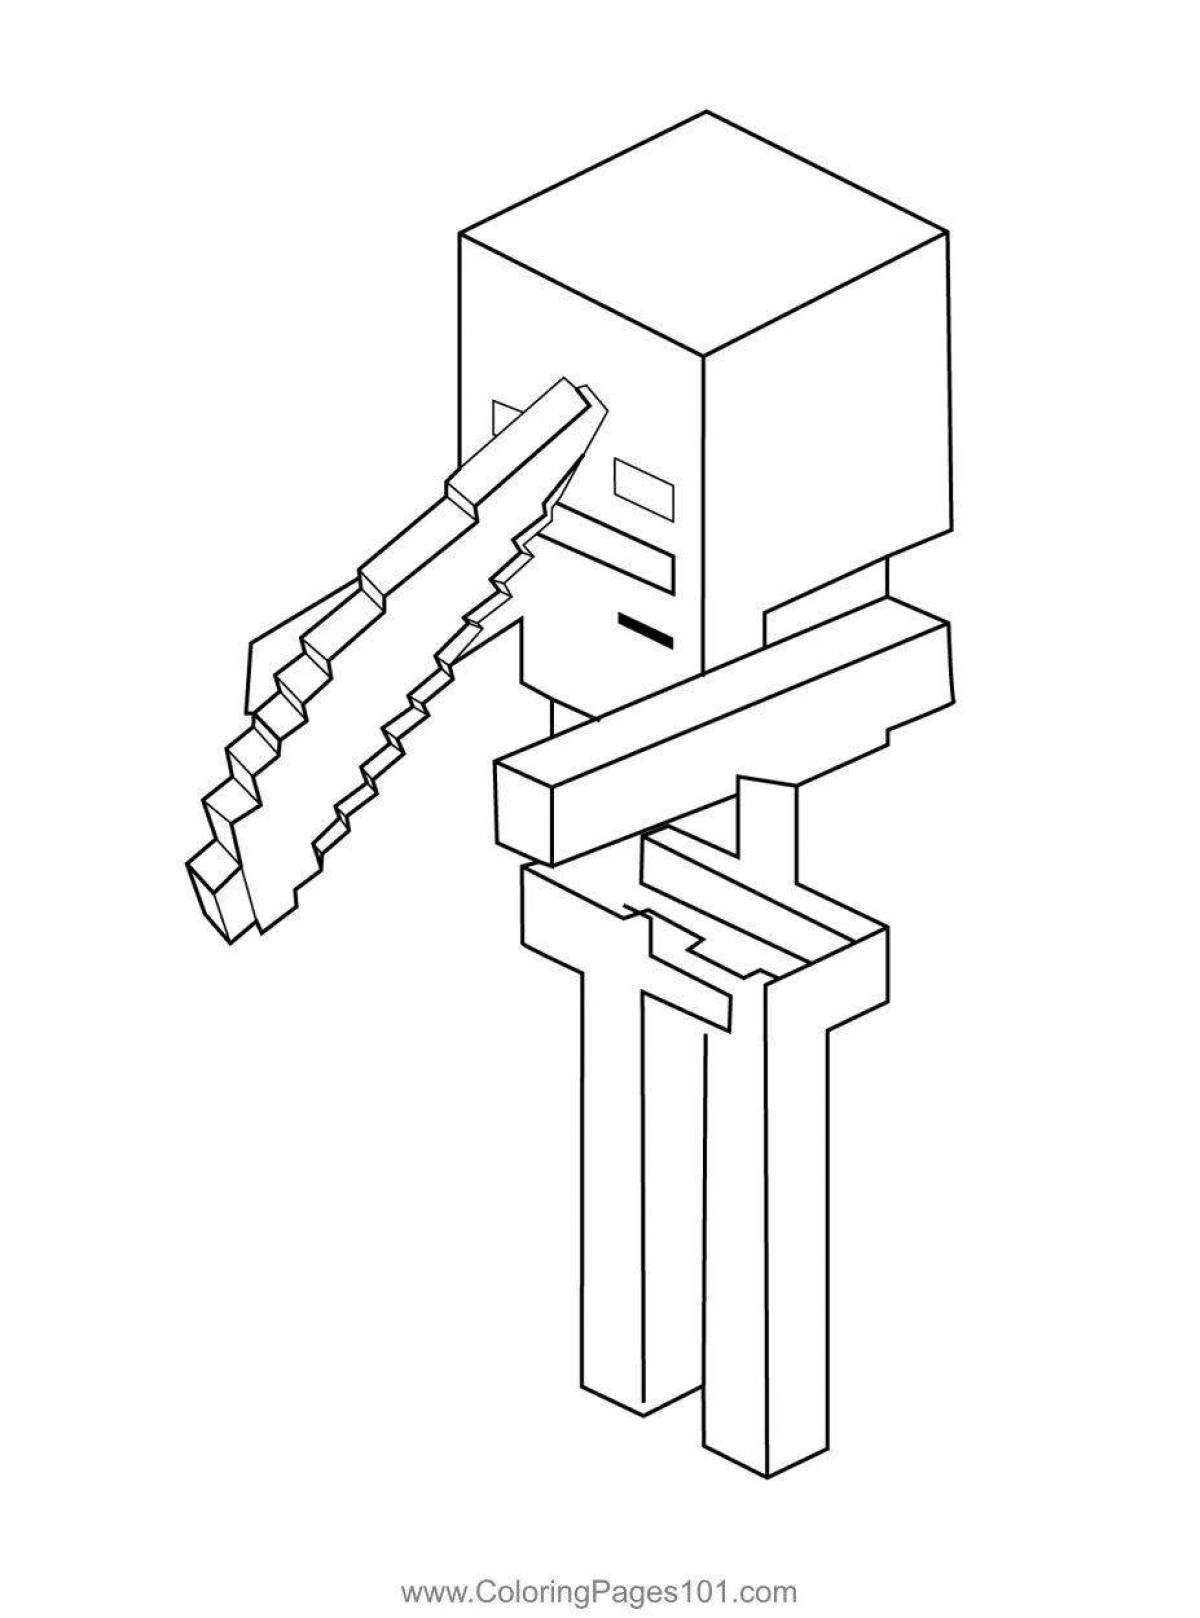 Splendorous ender dragon minecraft coloring page